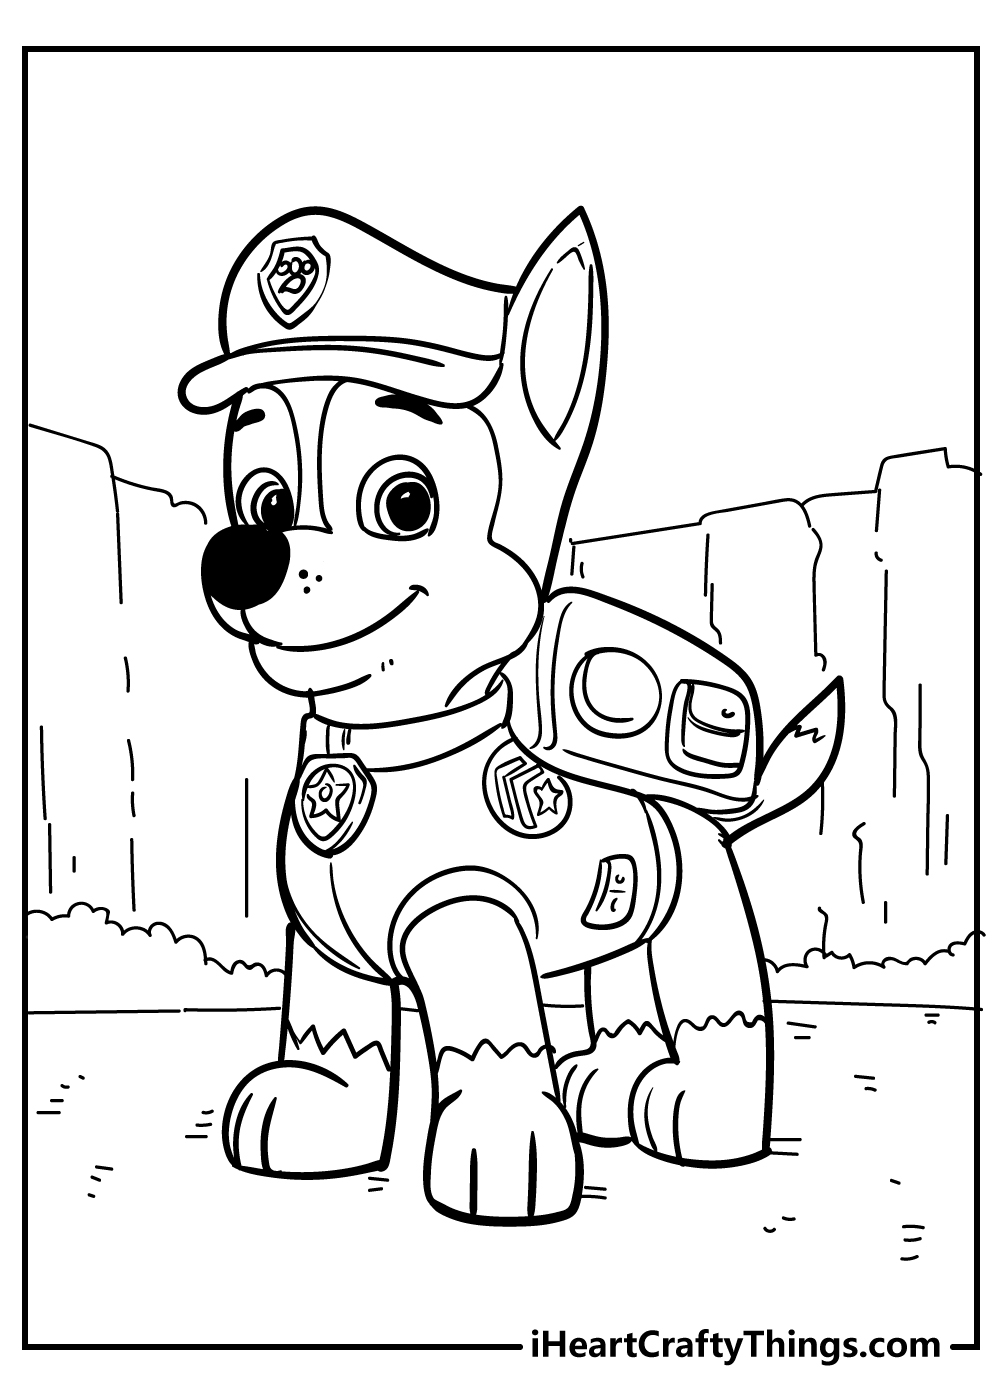 Paw Patrol Coloring Pages (Updated